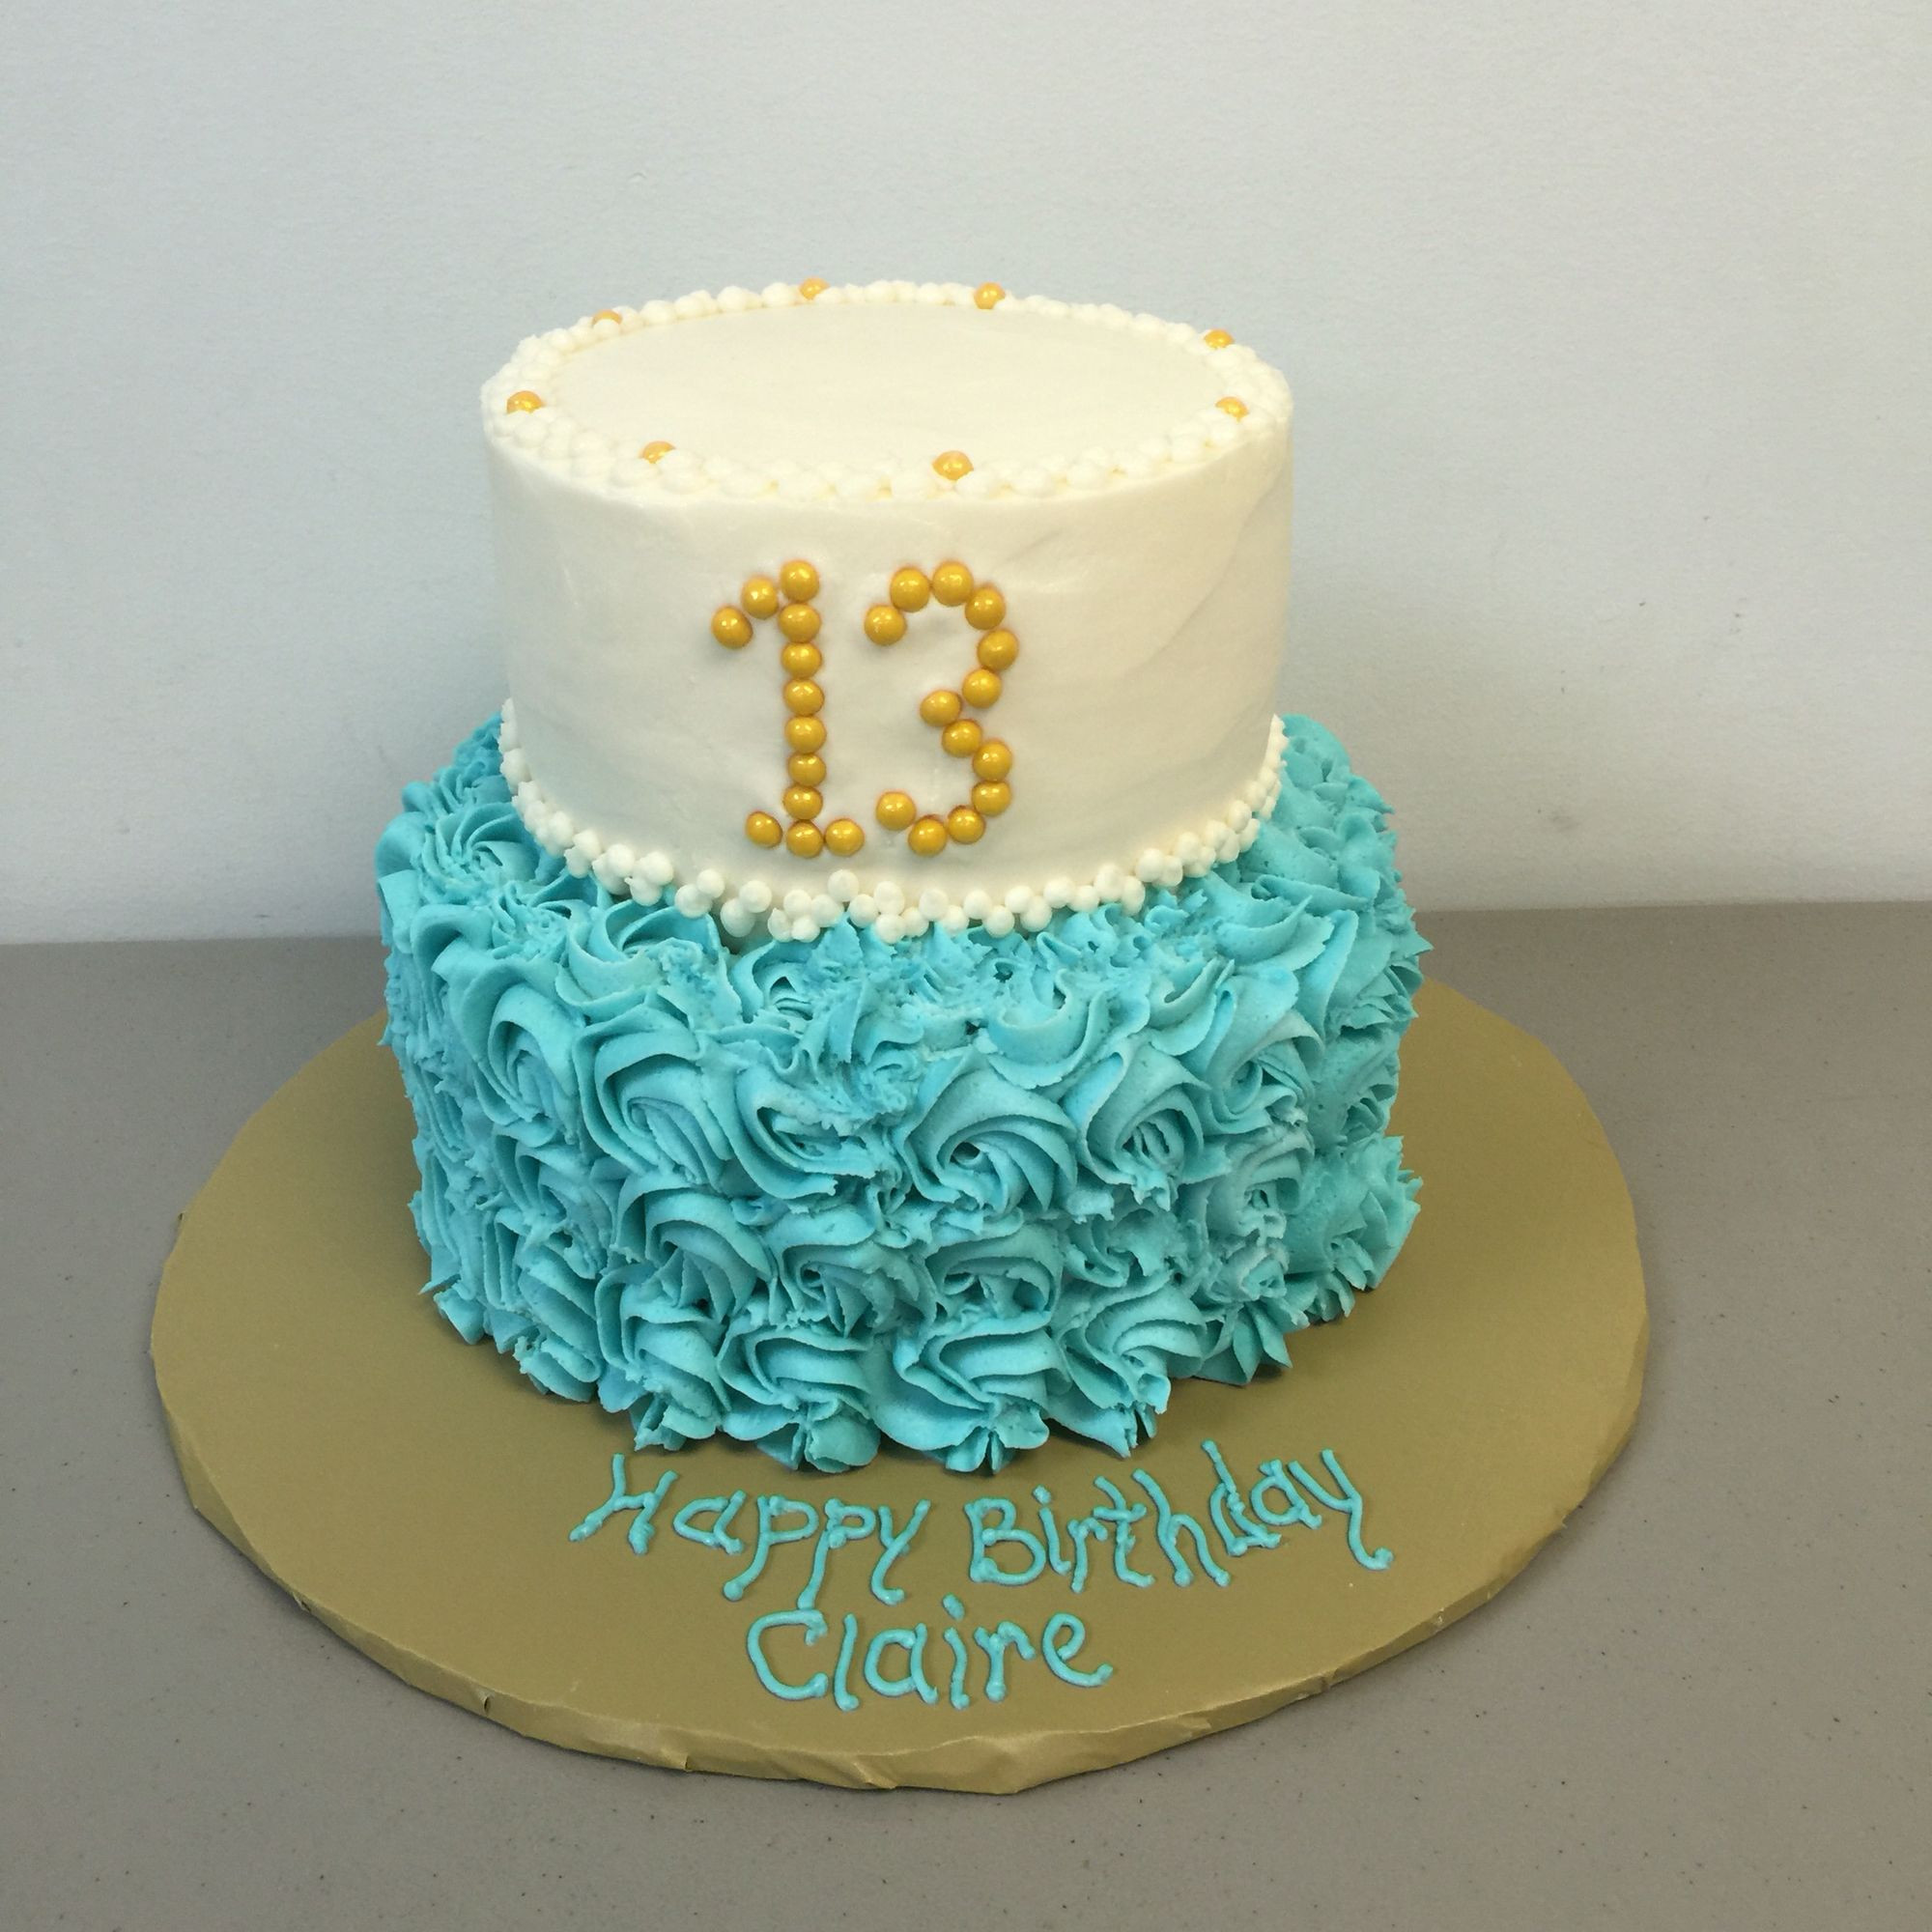 20 Ideas for Birthday Cakes for 13 Yr Old Girl - BirthDay Cakes For 13 Yr OlD Girl Fresh 13 Year OlD BirthDay Cake Of BirthDay Cakes For 13 Yr OlD Girl